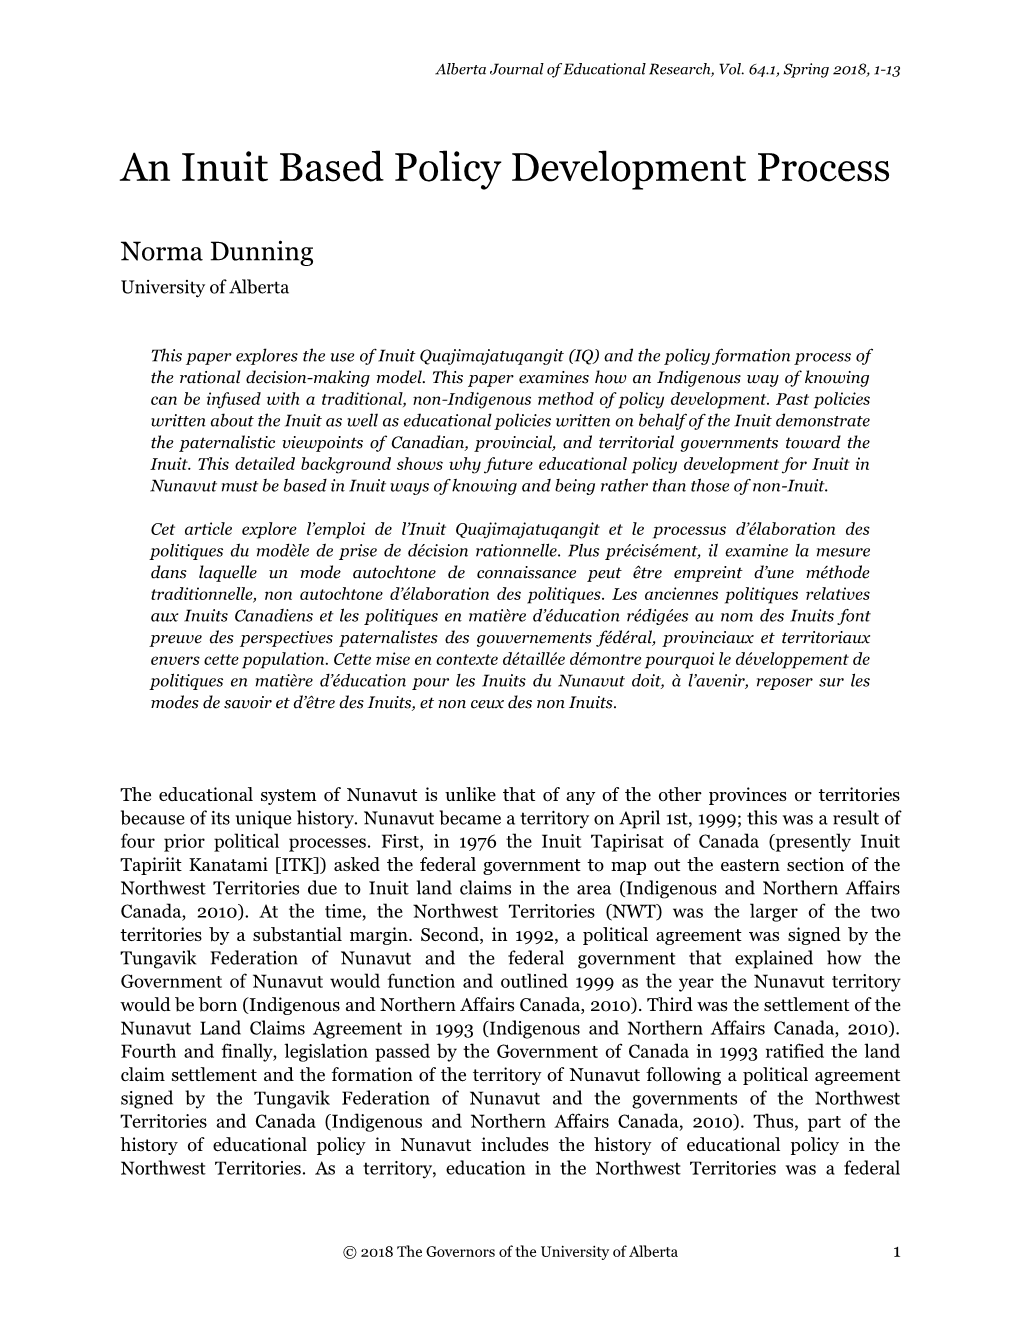 An Inuit Based Policy Development Process